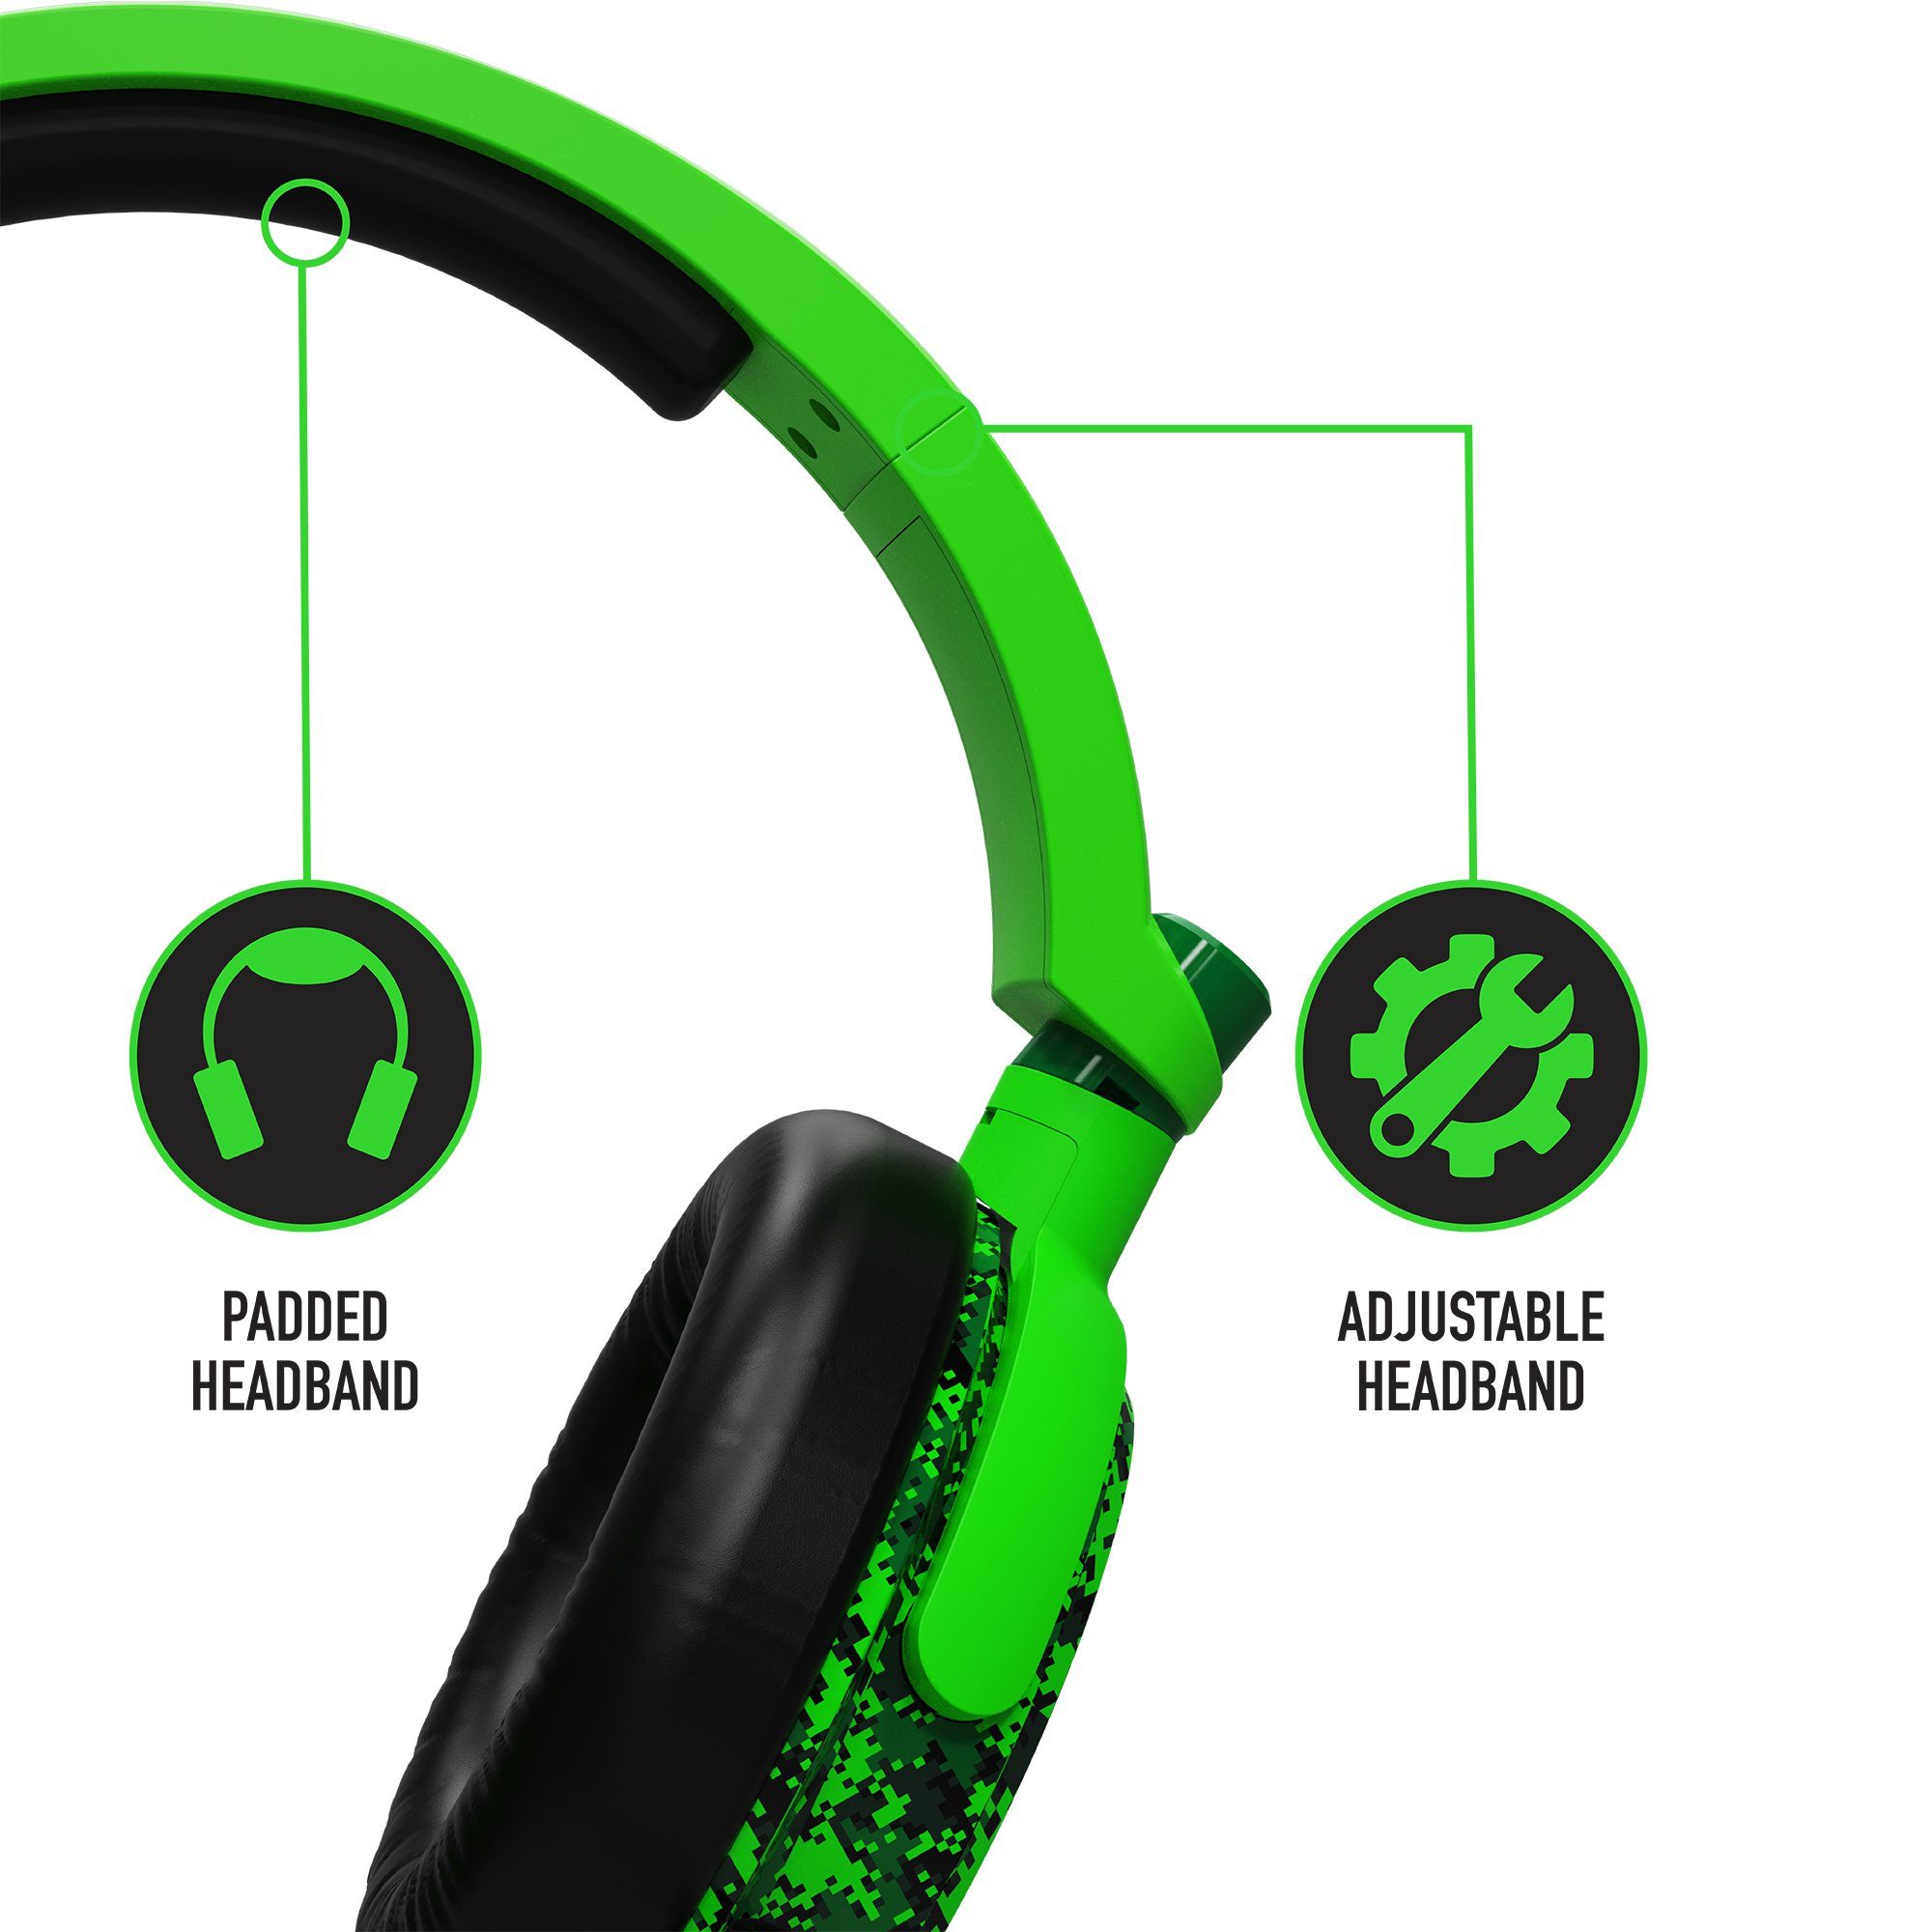 Stealth Multiformat Gaming Camo Headset C6-100 camouflage grün Gaming-Headset